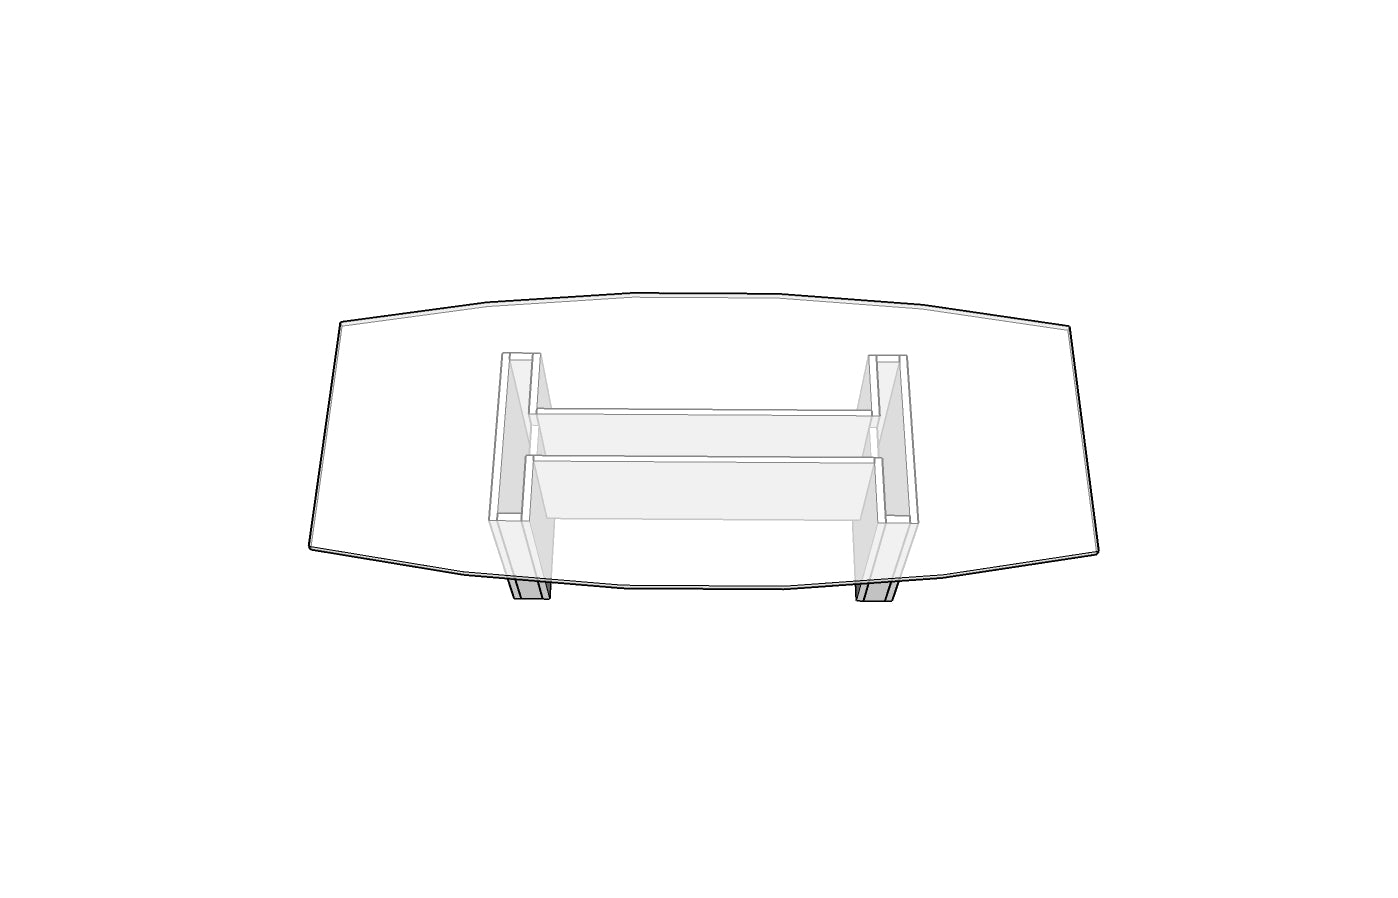 Treo Boat Conference Table with Sandwich Base